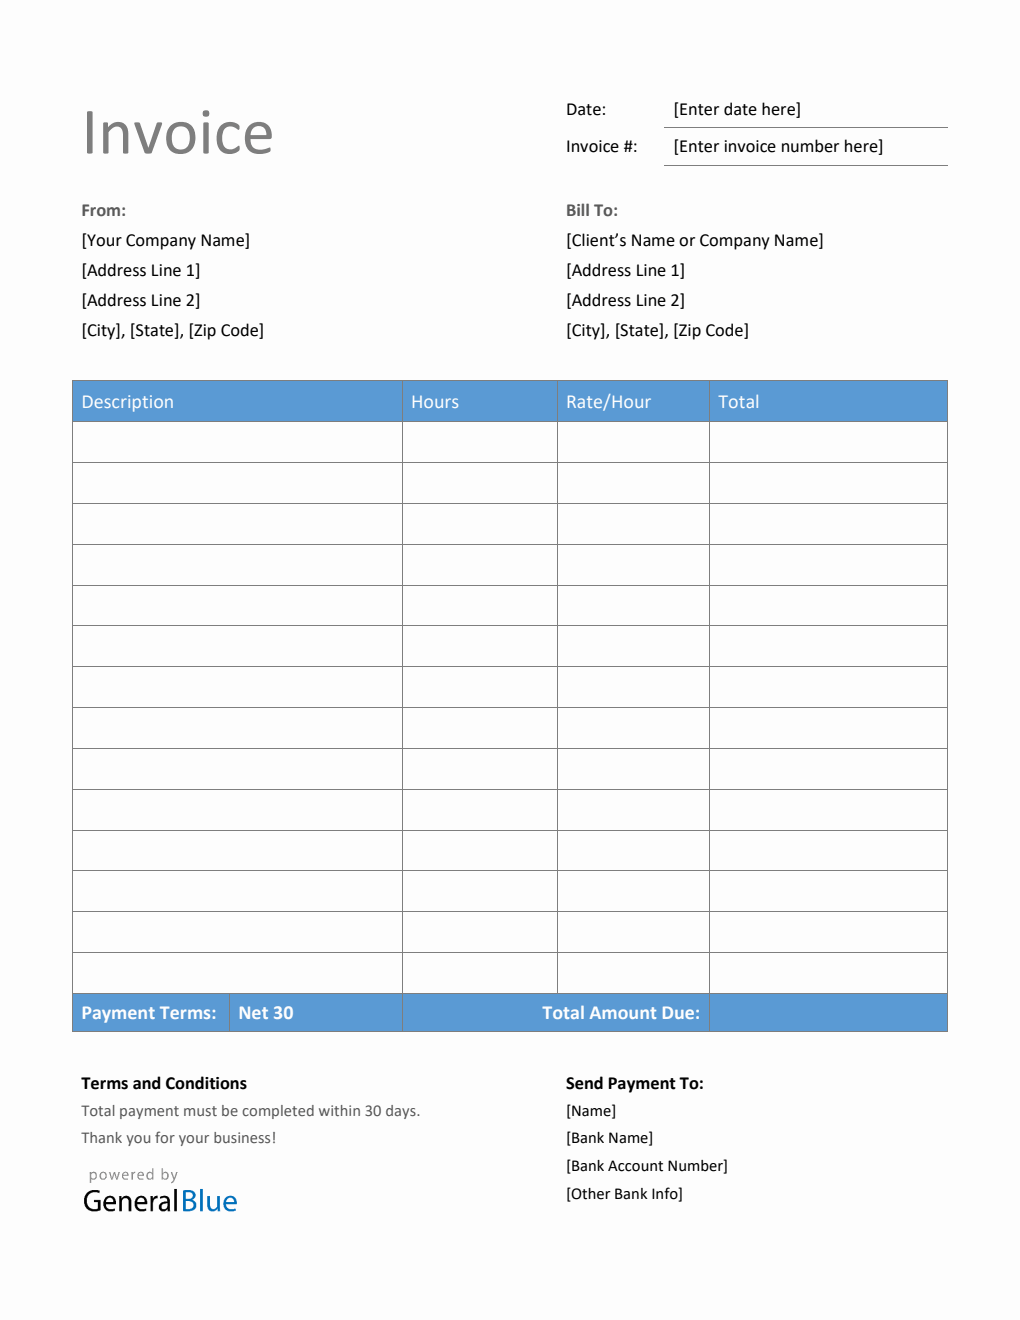 Invoice Template for U.S. Freelancers in Word (Blue)